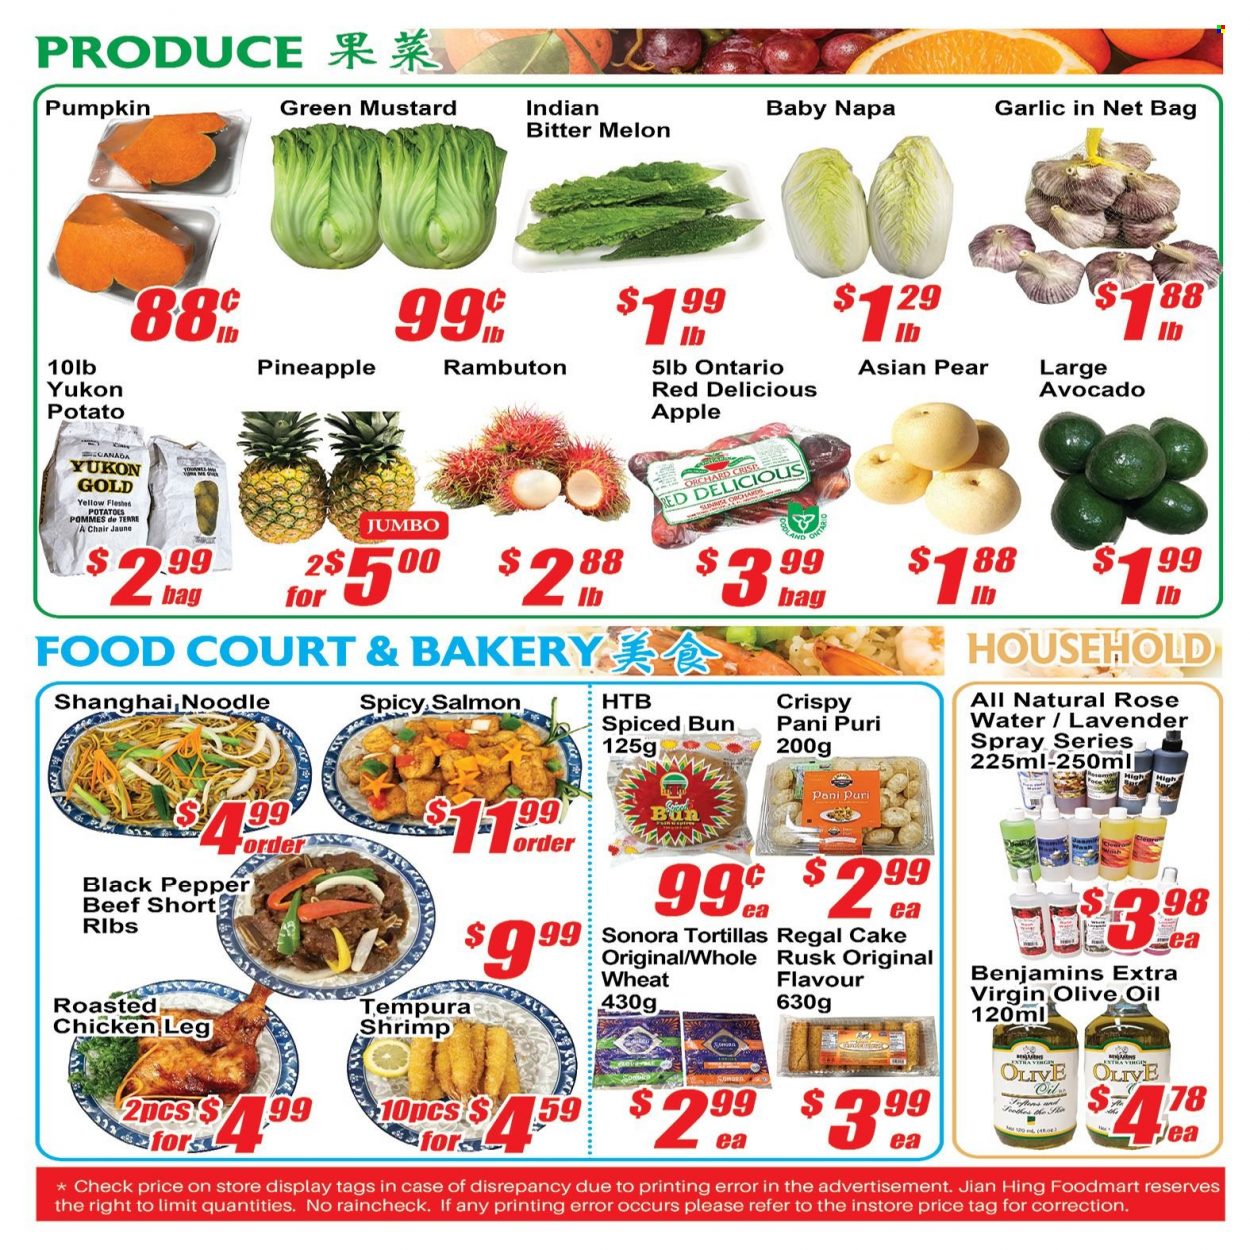 Jian Hing Supermarket Flyer - November 25, 2022 - December 01, 2022 - Sales products - tortillas, cake, rusks, garlic, potatoes, pumpkin, avocado, Red Delicious apples, pineapple, pears, melons, salmon, shrimps, chicken roast, noodles, black pepper, mustard, extra virgin olive oil, olive oil, oil, wine, rosé wine, chicken legs, beef ribs. Page 4.